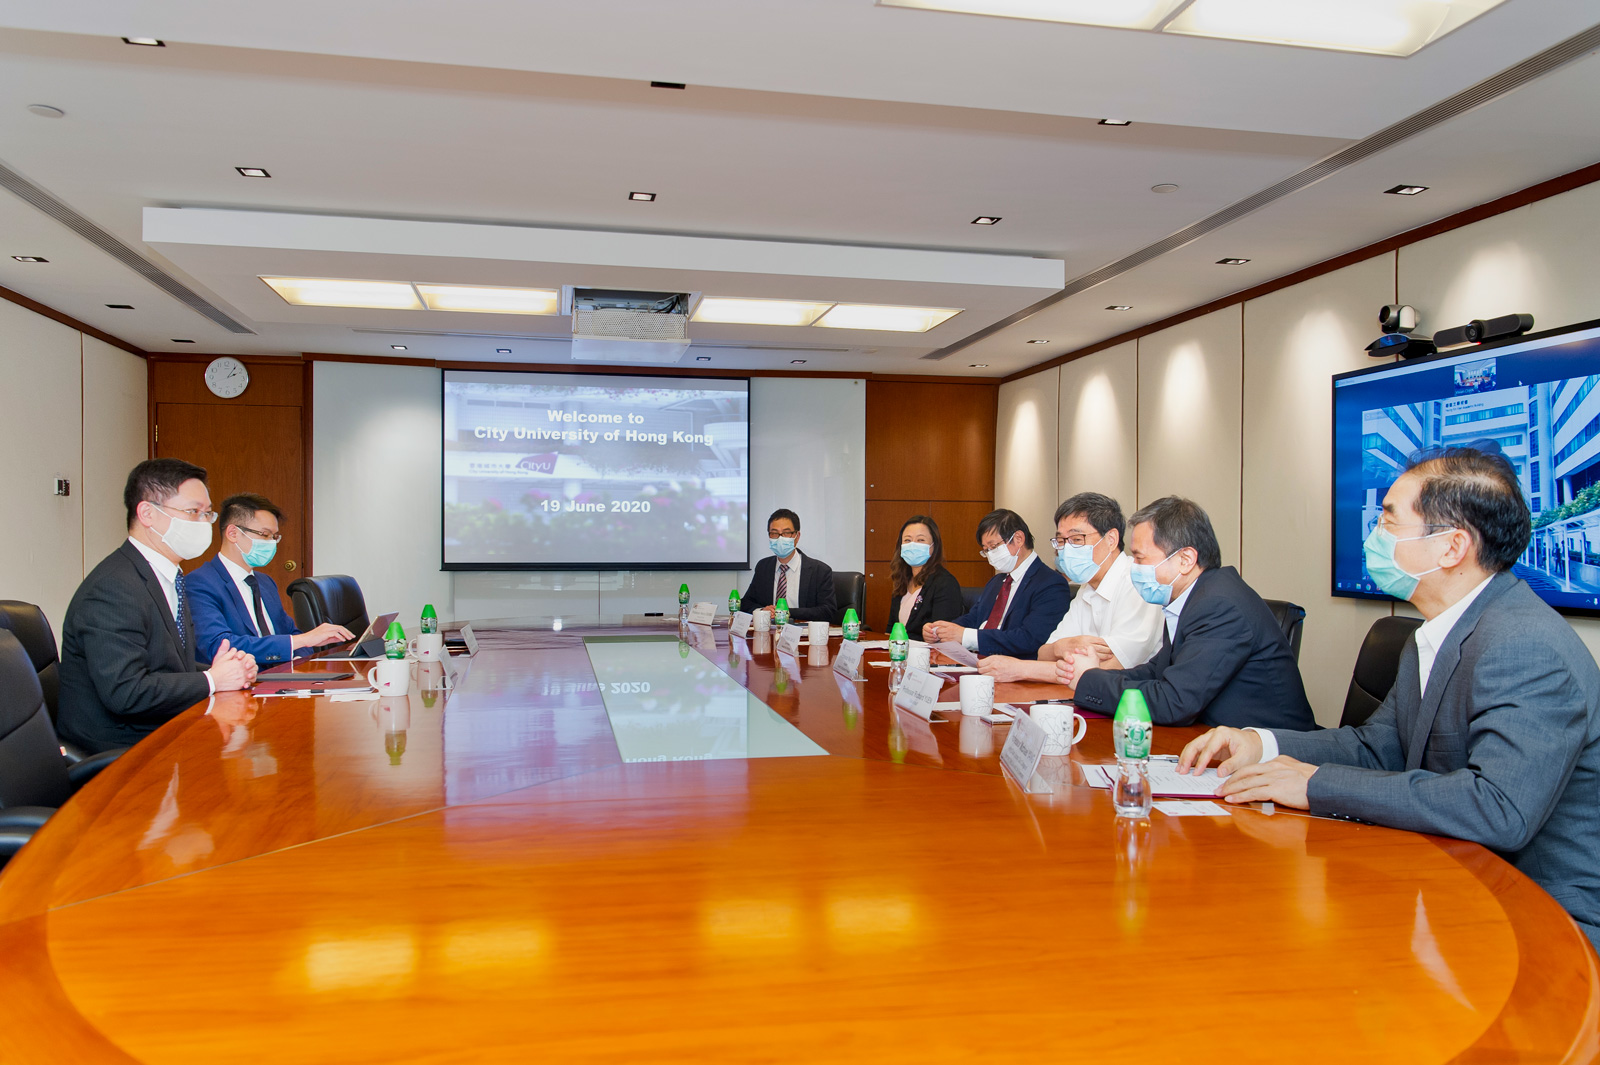 Mr Alfred Sit Wing-hang (first from left) was briefed on CityU’s latest developments by President Way Kuo (third from right) and other senior management.